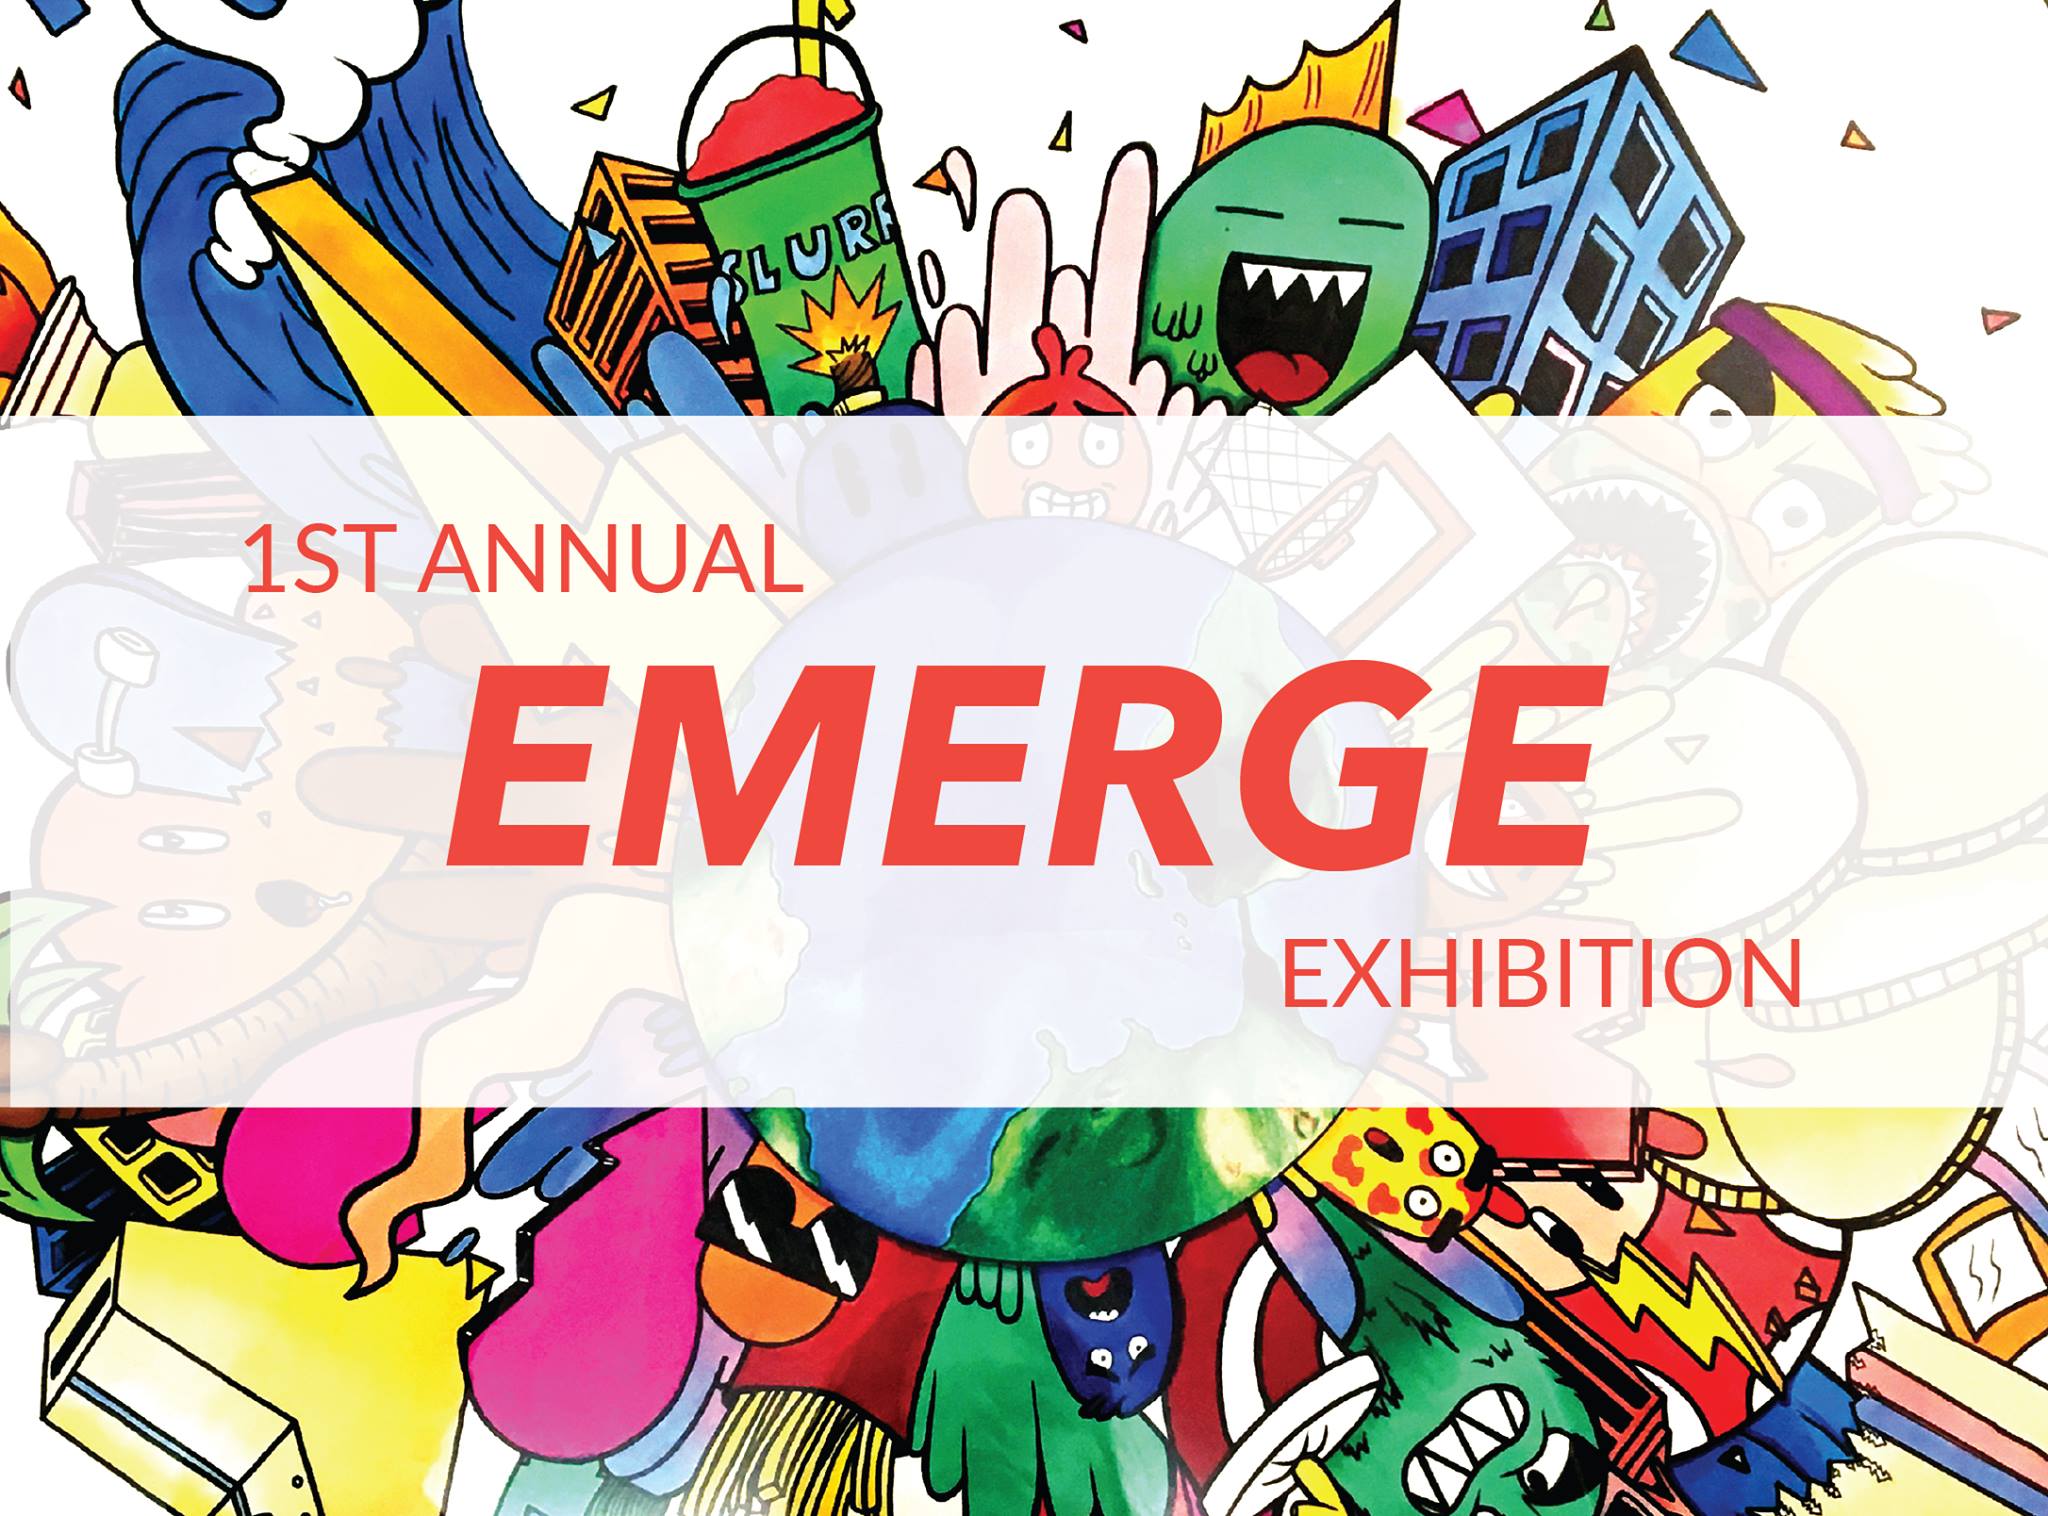 1st Annual EMERGE Exhibition